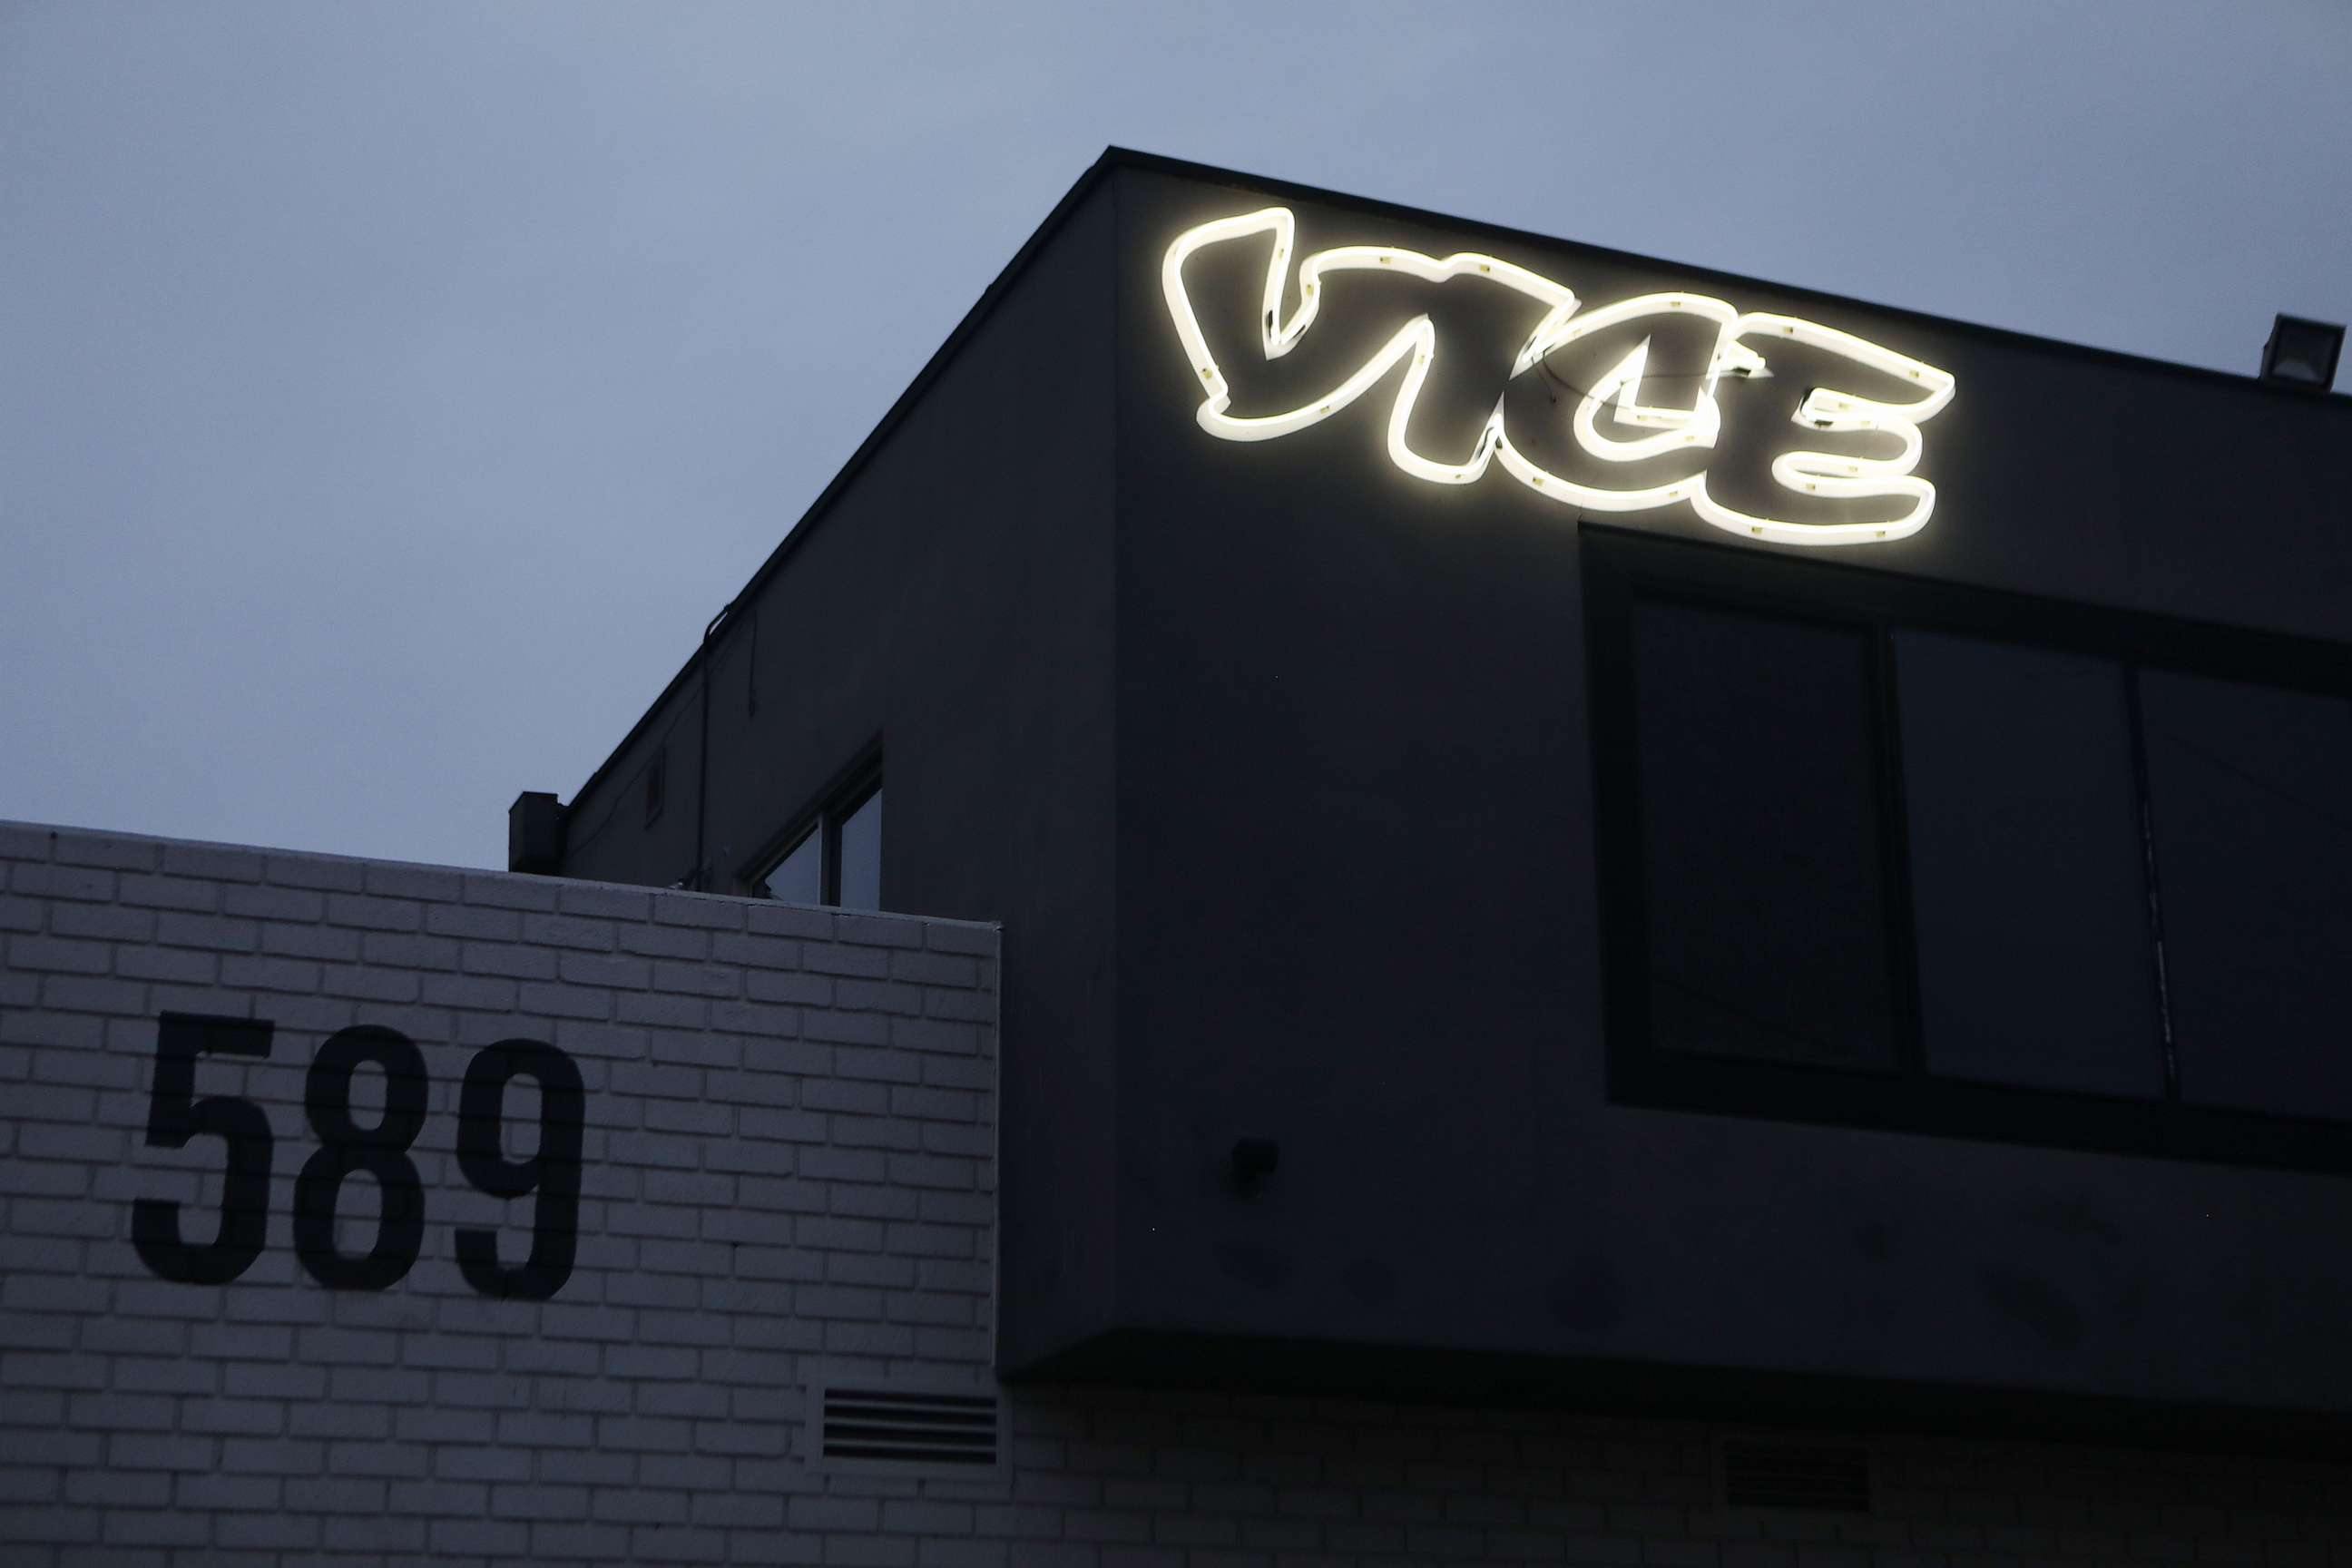 PHOTO: Vice Media offices display the Vice logo at dusk, Feb. 1, 2019, in Venice, Calif.